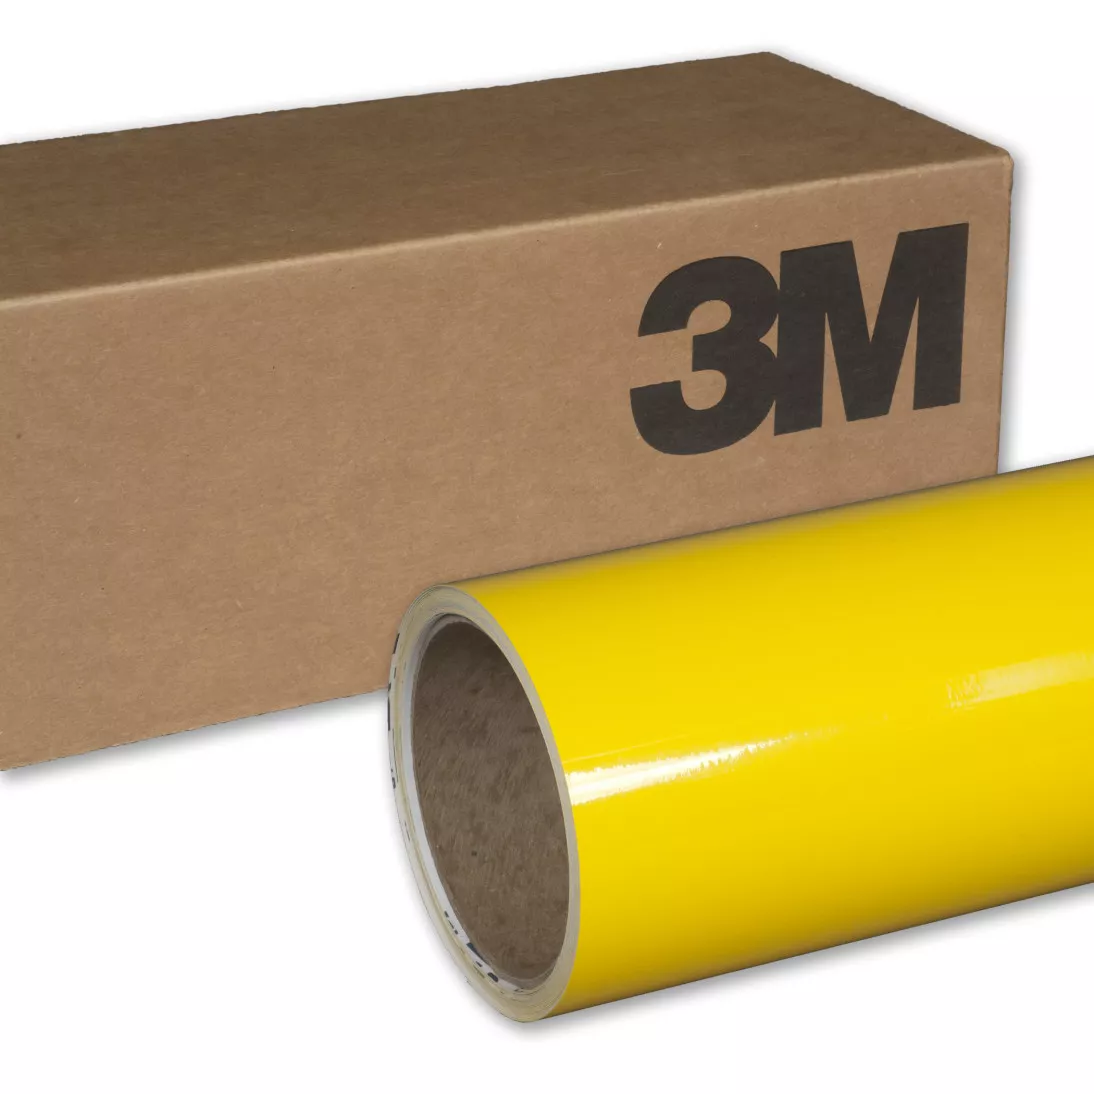 3M™ Wrap Film Series 1080-G15, Gloss Bright Yellow, 60 in x 5 yd